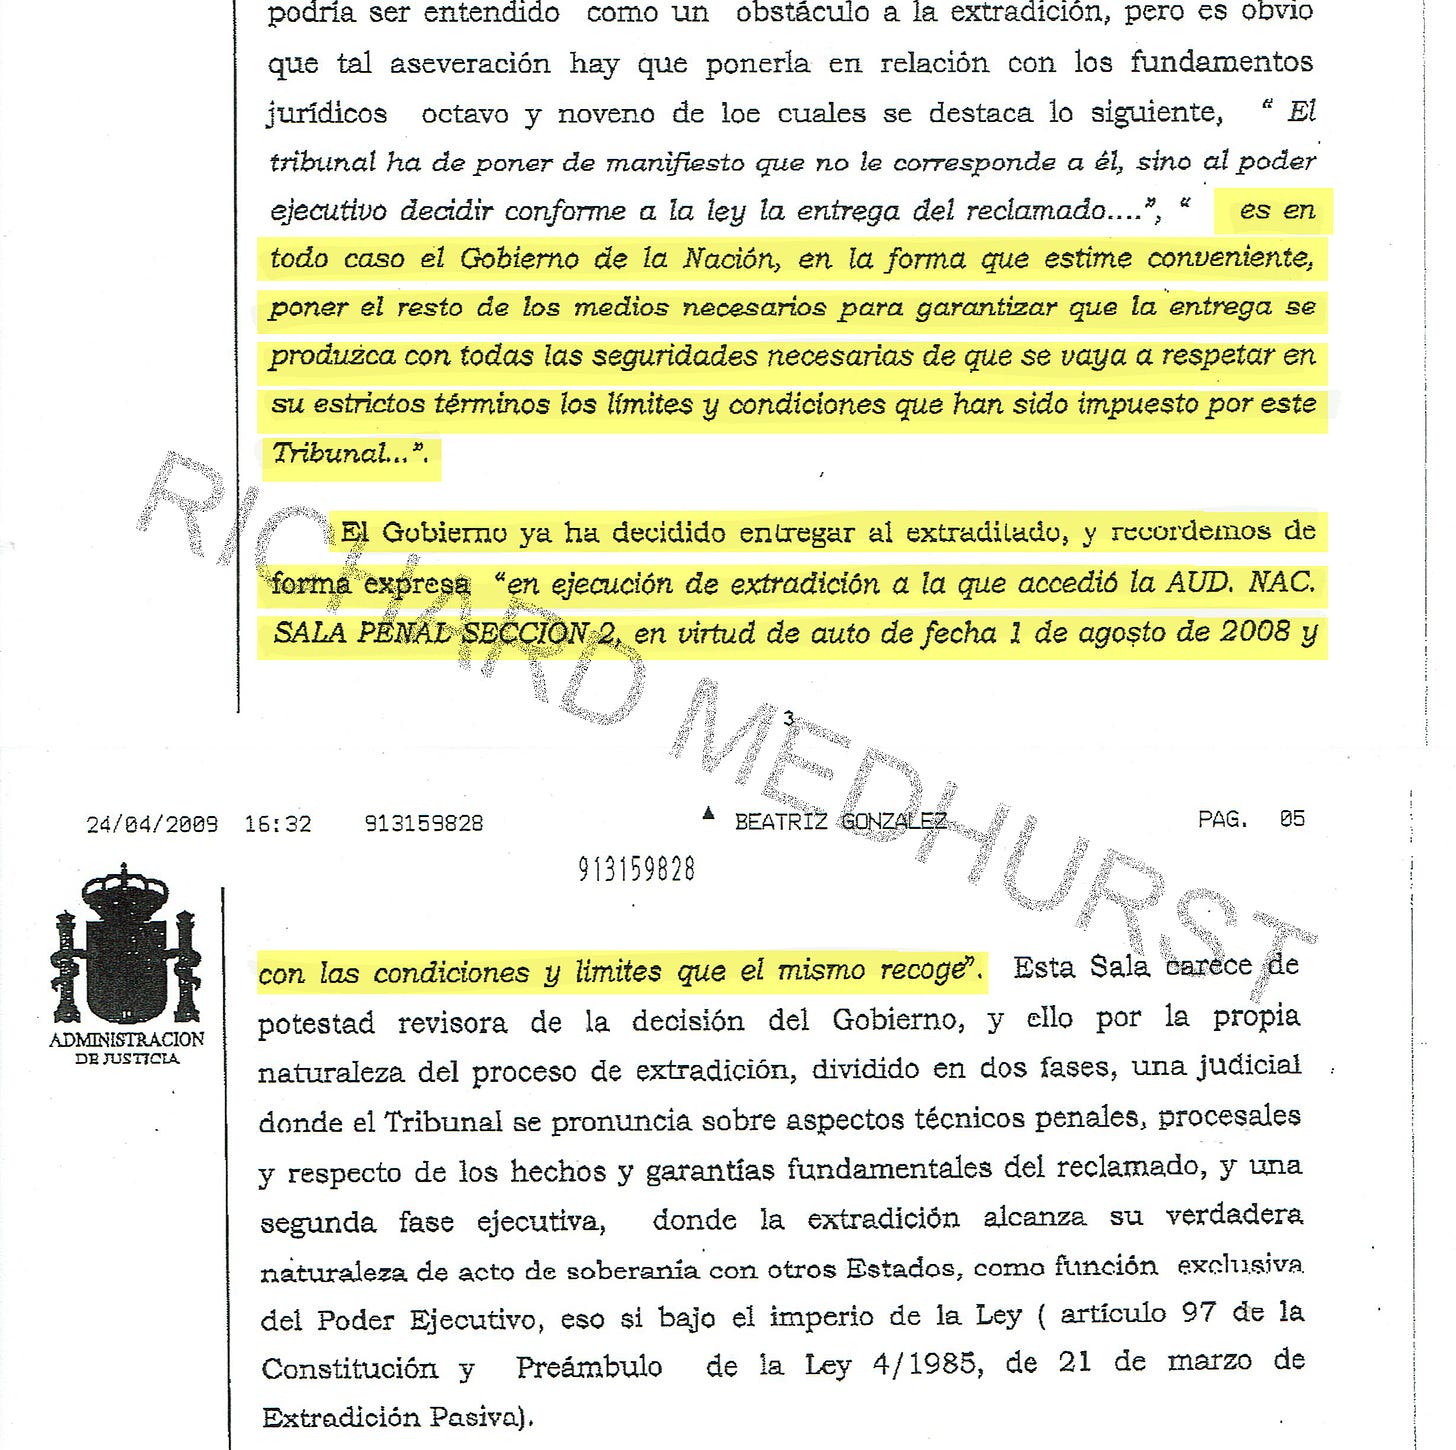 Spanish Court orders the Spanish government to make sure the United States complies with the conditions of Mendoza’s extradition, by way of the Acta de Entrega.